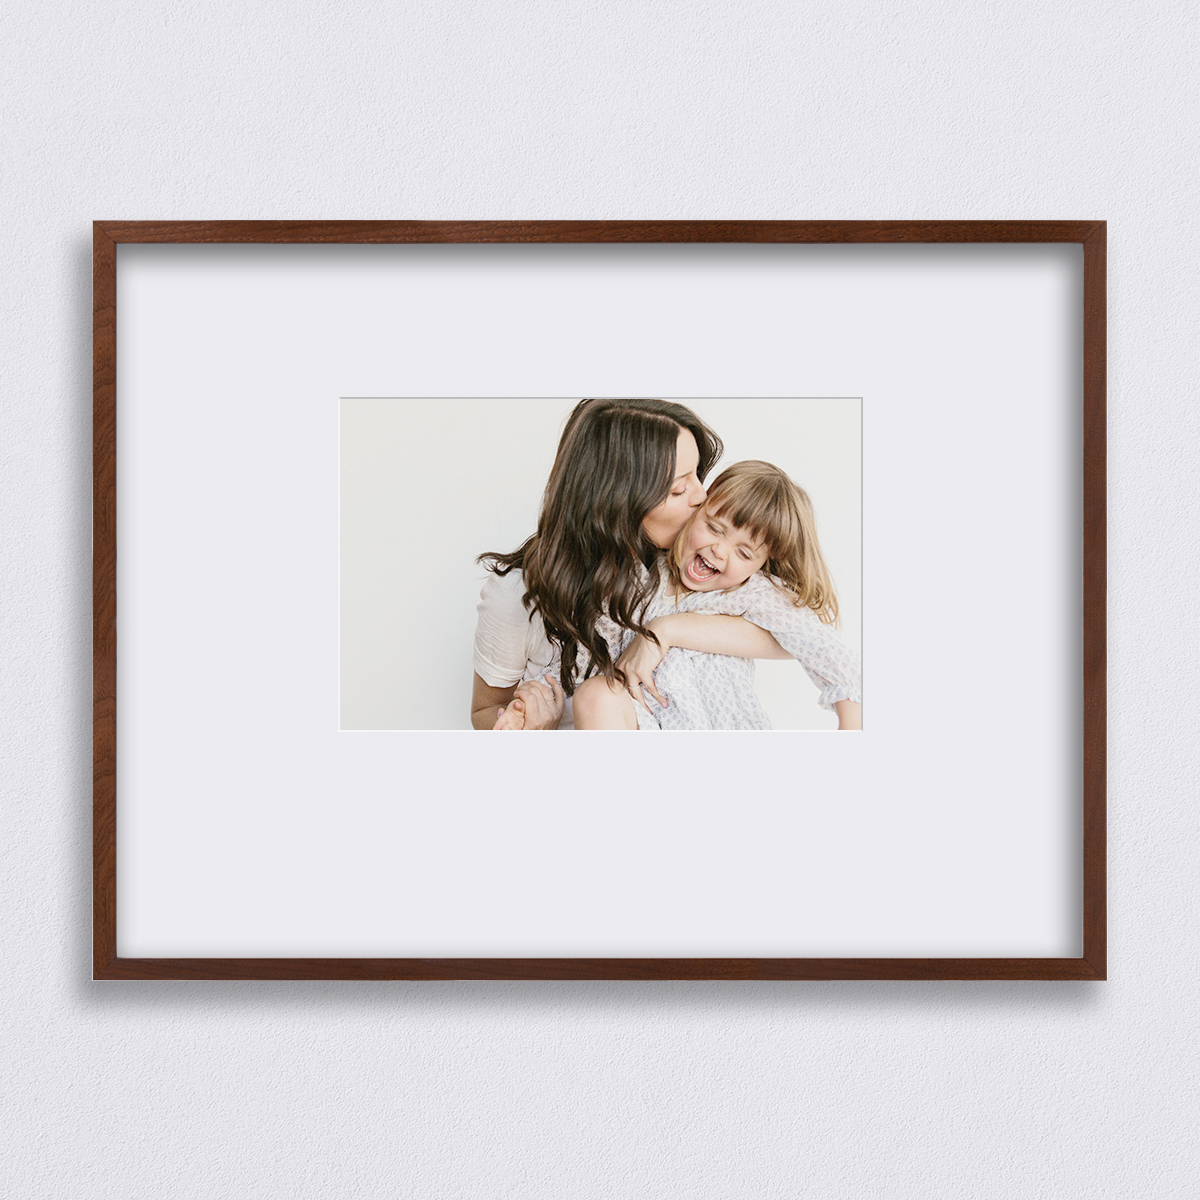 40 x 30 inch Artifact Uprising Deep Set Frame in Black finish matted to 22 x 14 inch featuring photo of mother kissing daughter on the cheek as she laughs